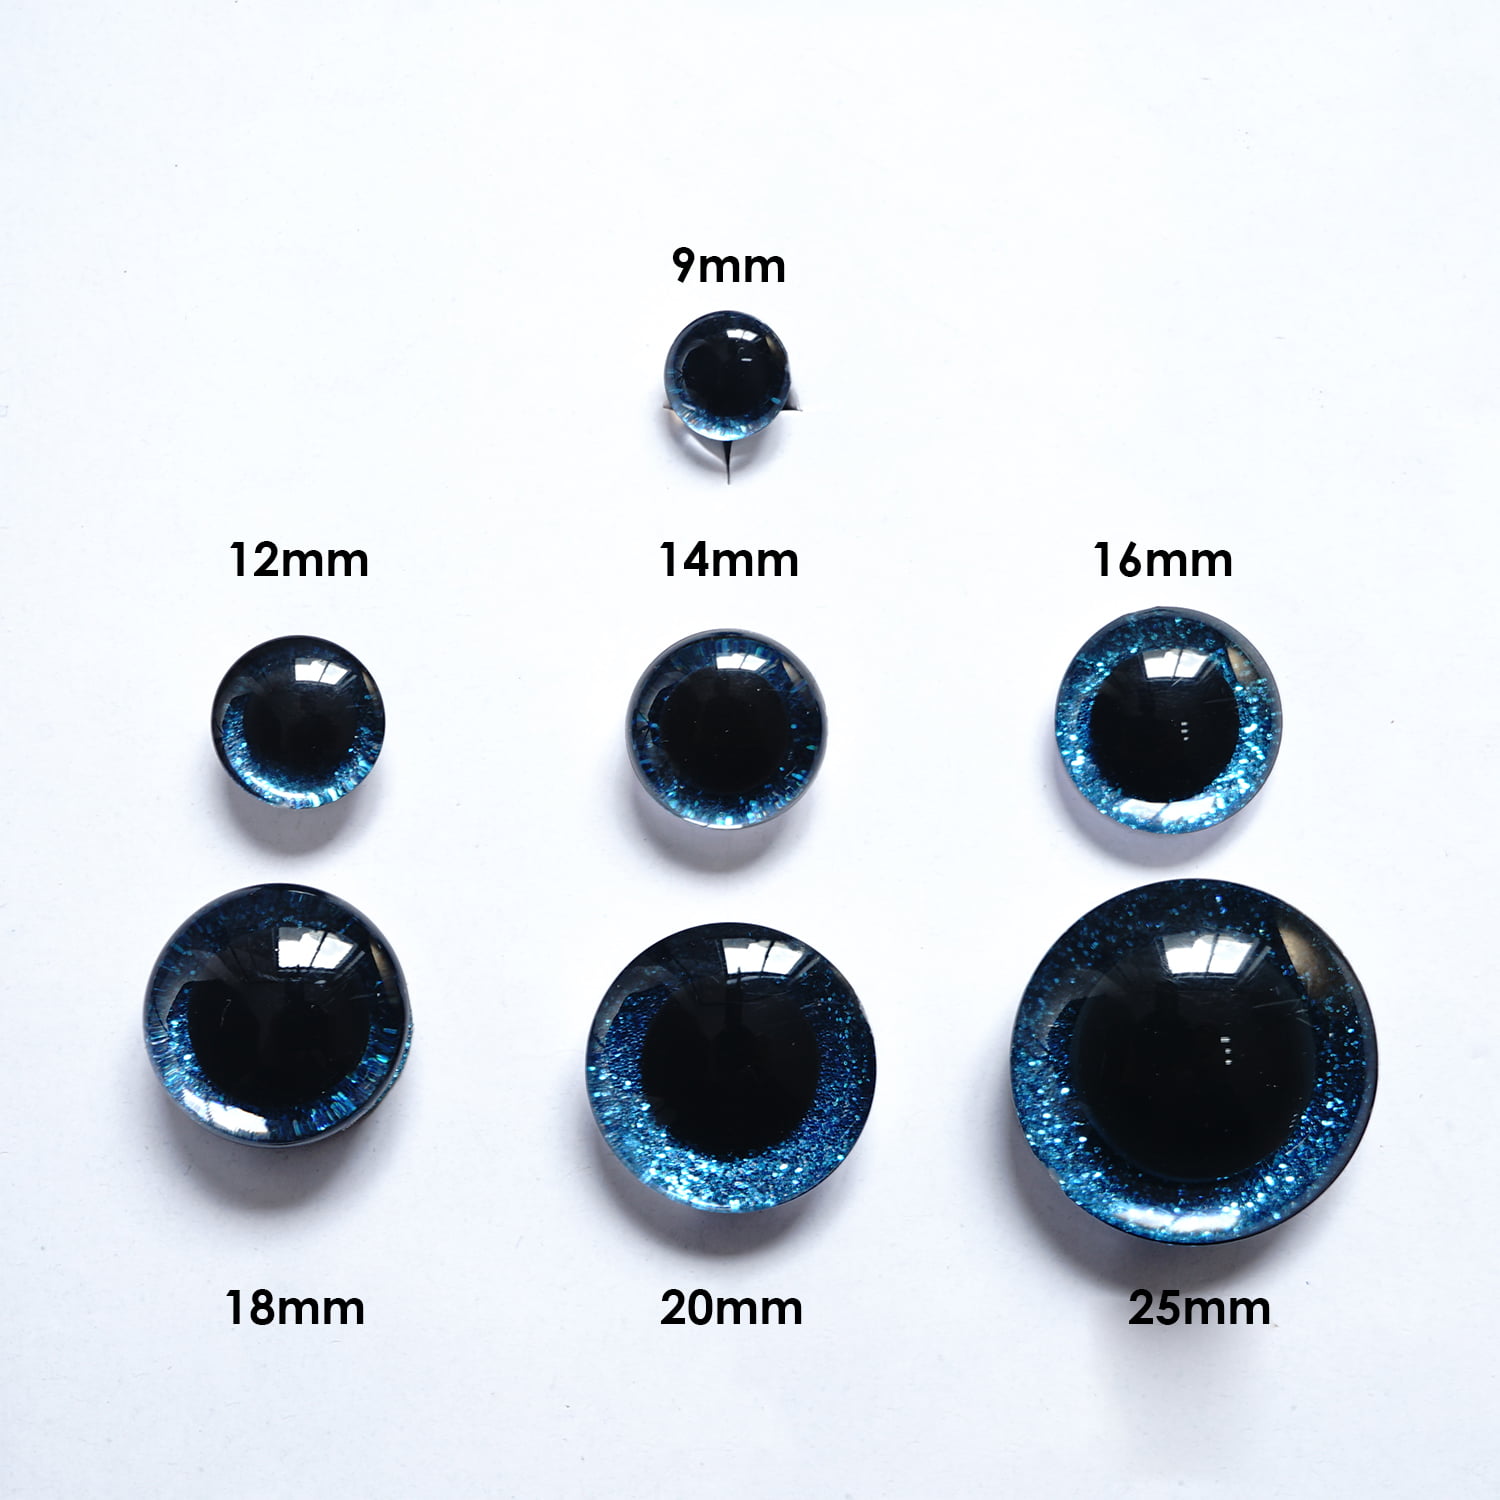 MAGIMODAC 16 Pcs 6 Color Plastic Safety Eyes 9mm 12mm 14mm 16mm 18mm 20mm  25mm Premium Round Eyes with Glitter Circle and Washers for Stuffed Doll 